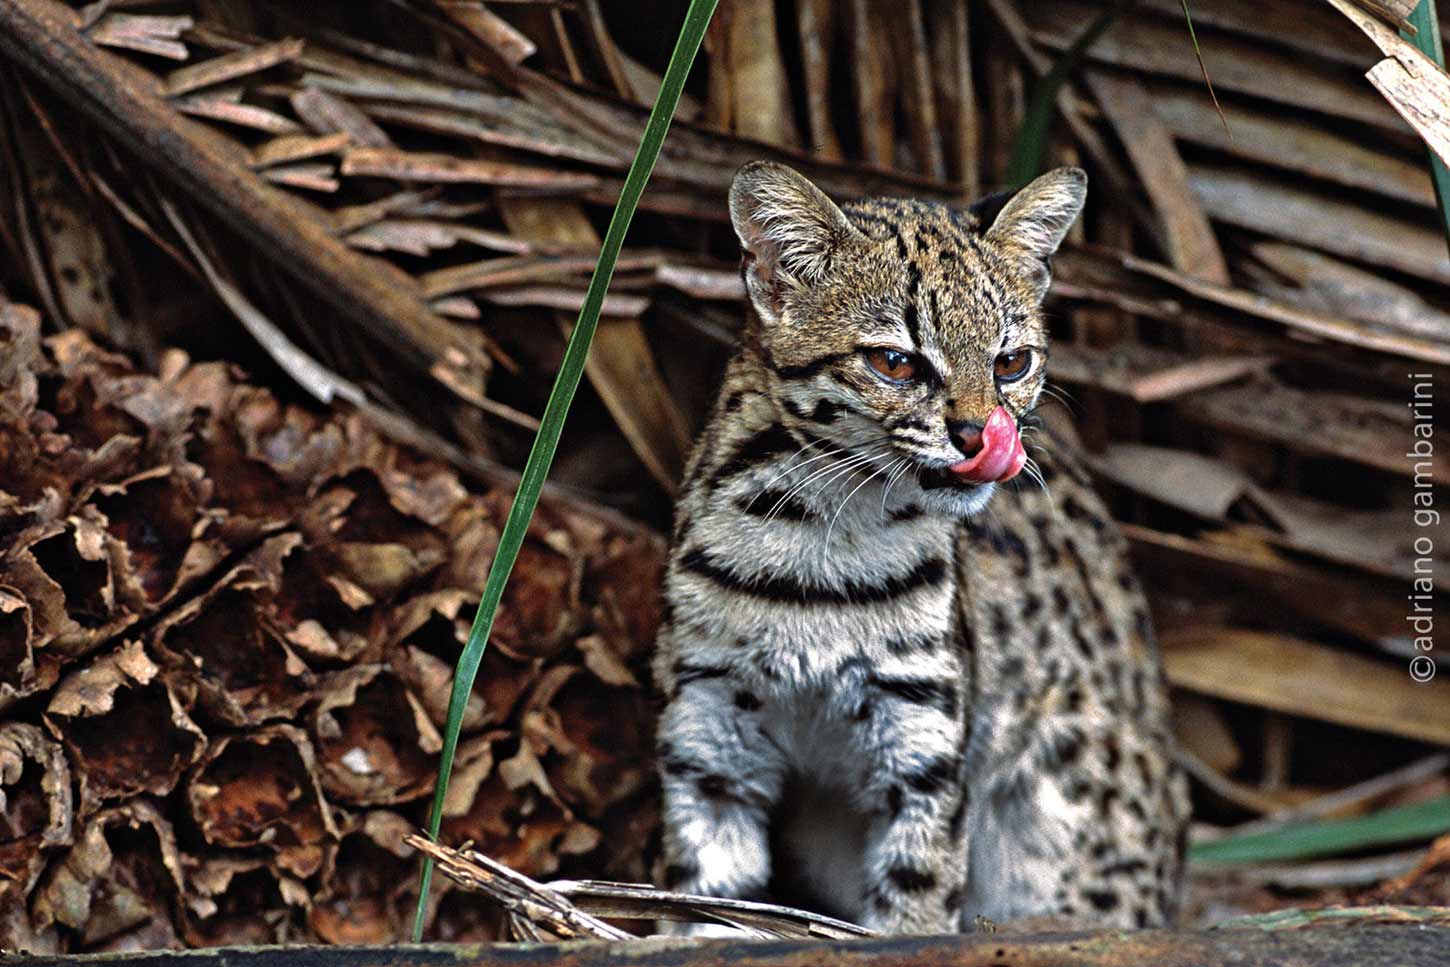 Southern Tiger Cat - Facts, Diet, Habitat & Pictures on